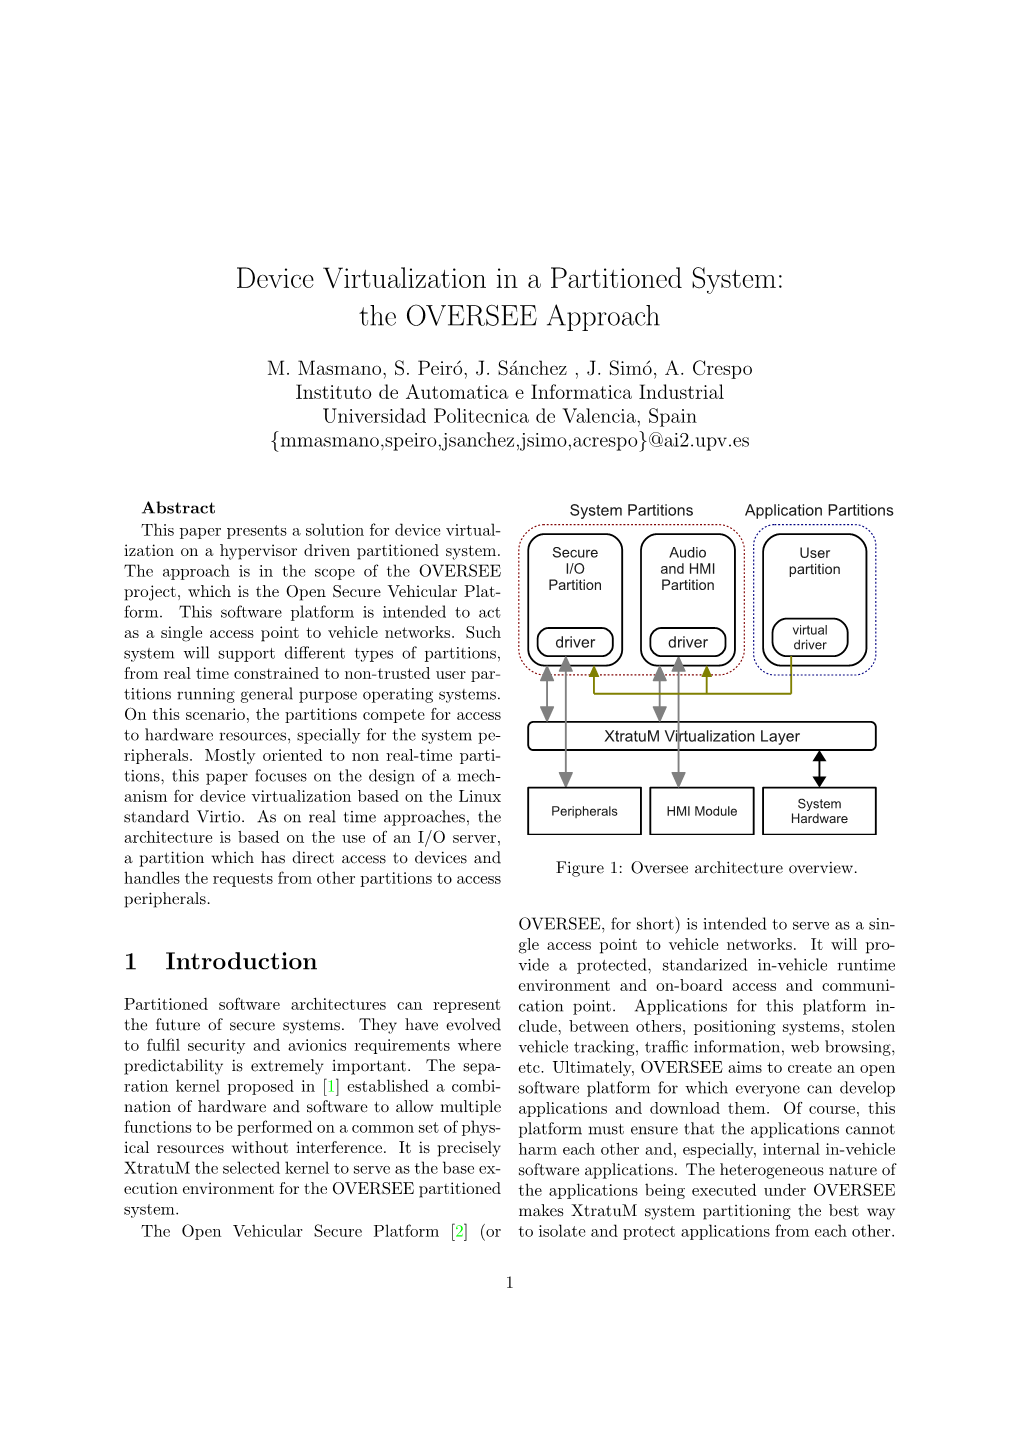 Device Virtualization in a Partitioned System: the OVERSEE Approach